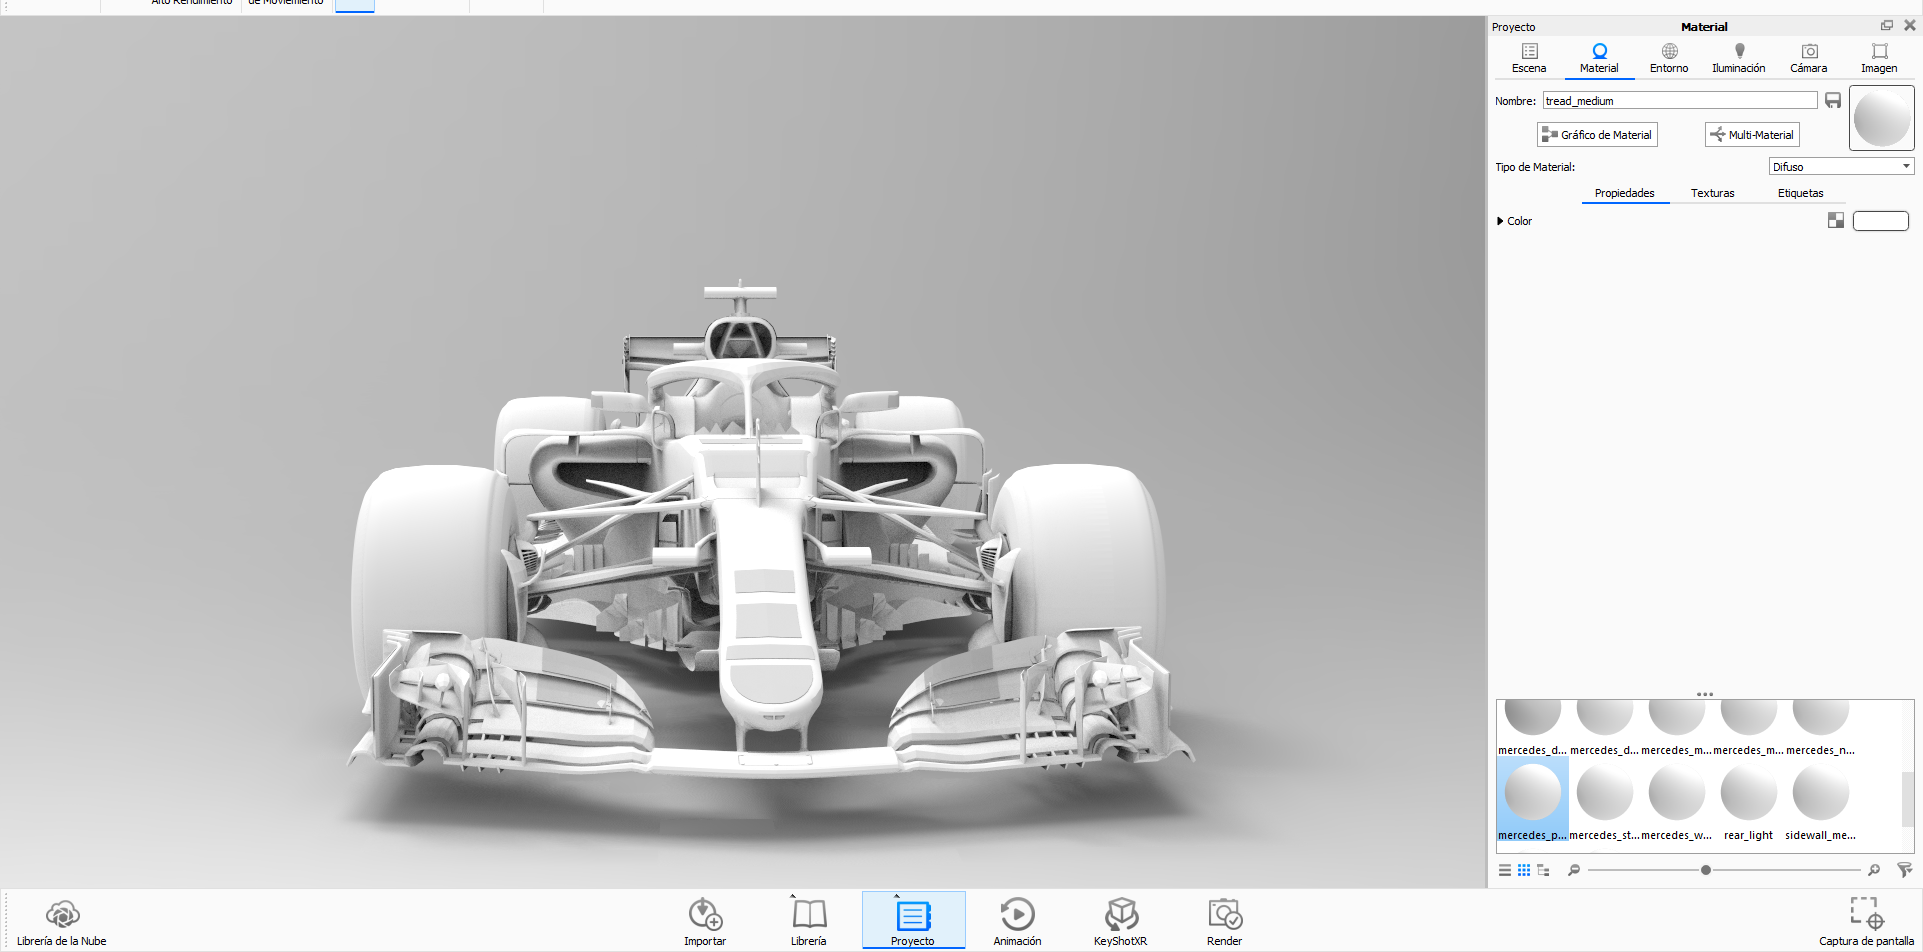 Misc - F1 2018 3D Models for Photoshop [Deleted] | Page 3 | RaceDepartment